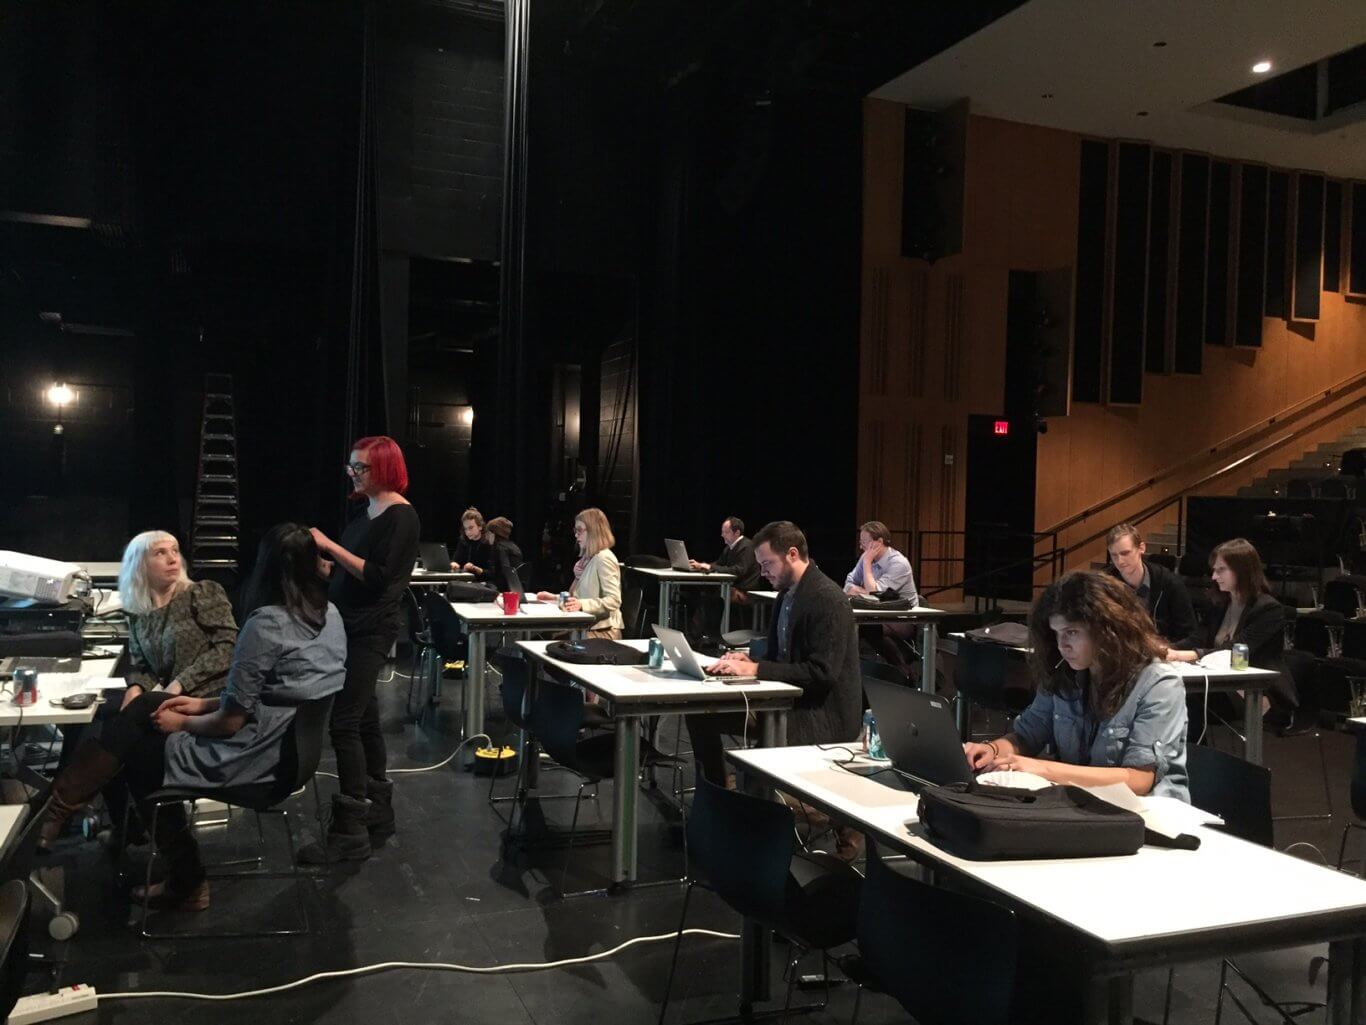 In a dramatically lit space, people sit at three rows of tables that are covered in laptops; some people are working in groups. In the first row, two women turn to a red-headed woman standing, engaging them in conversation.